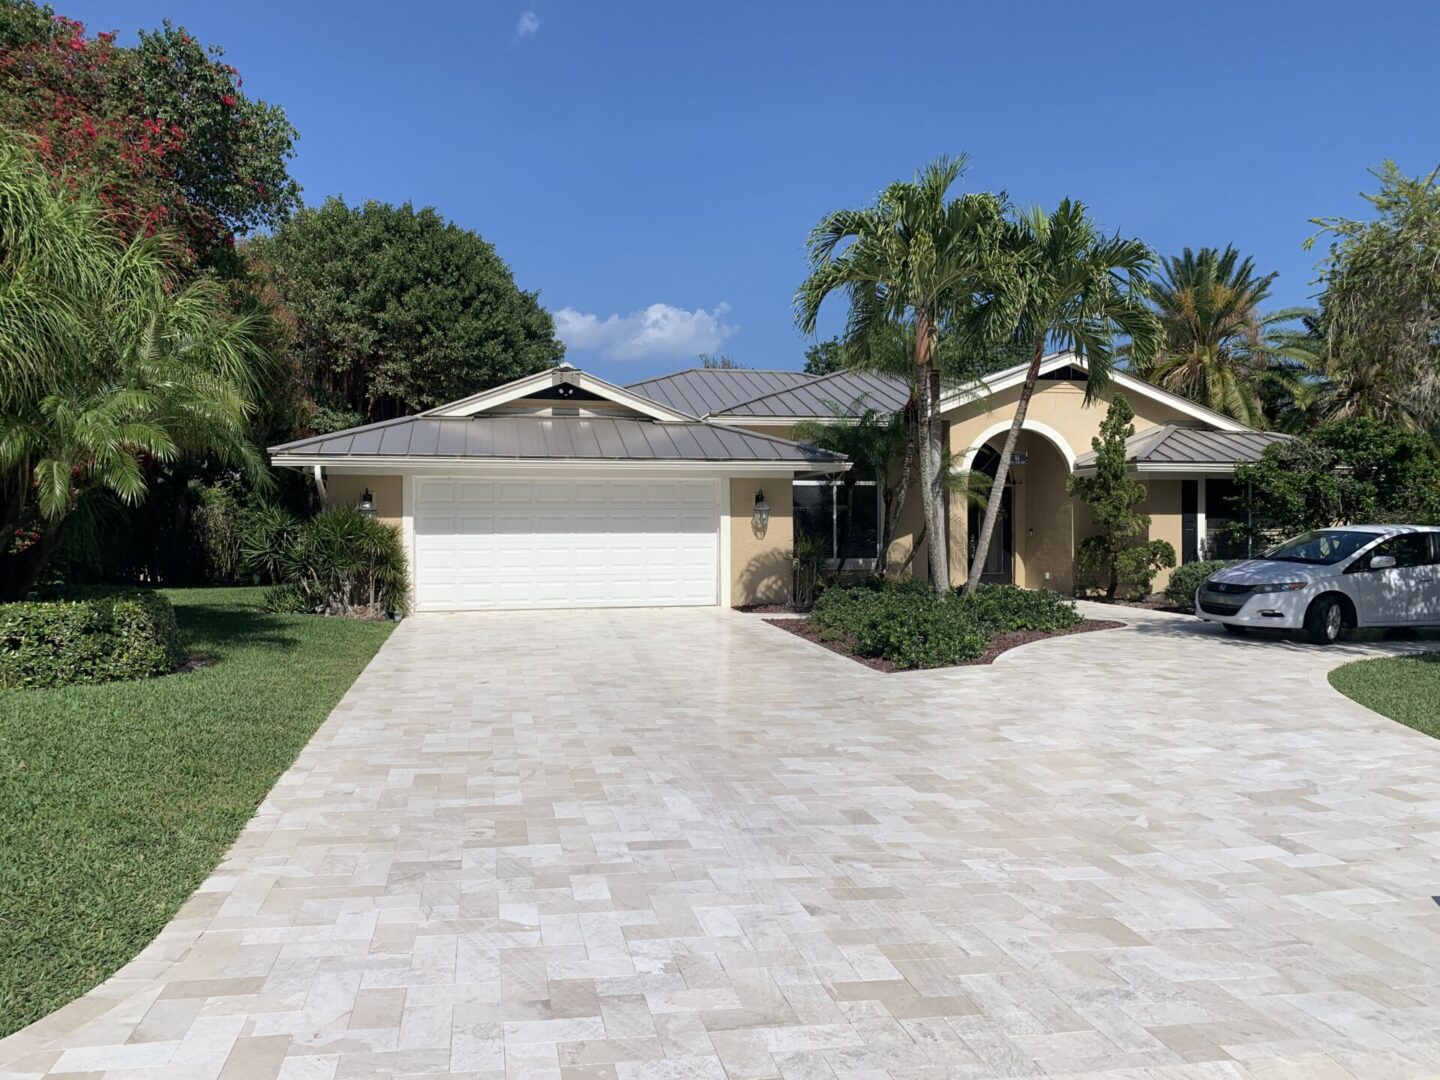 A single-story house with a tiled roof, surrounded by palm trees, featuring a two-car garage and a spacious driveway with a parked car on a sunny day.